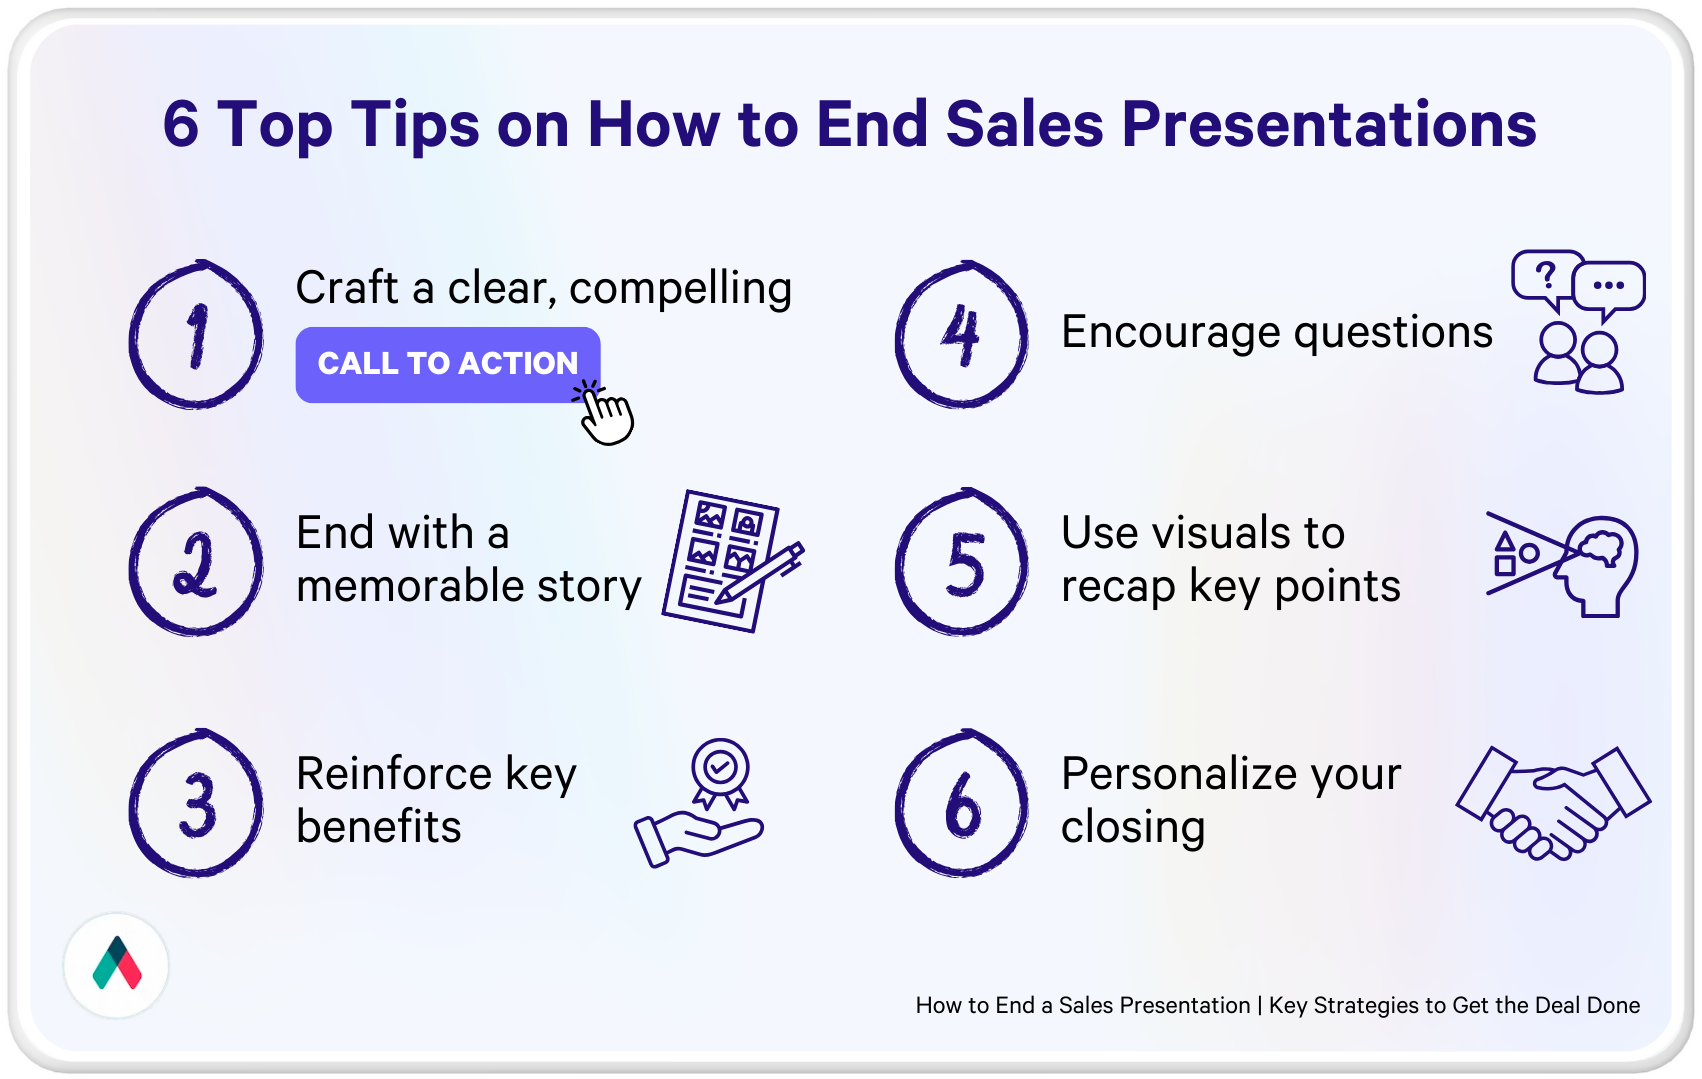 a poster showing 6 top tips on how to end sales presentations